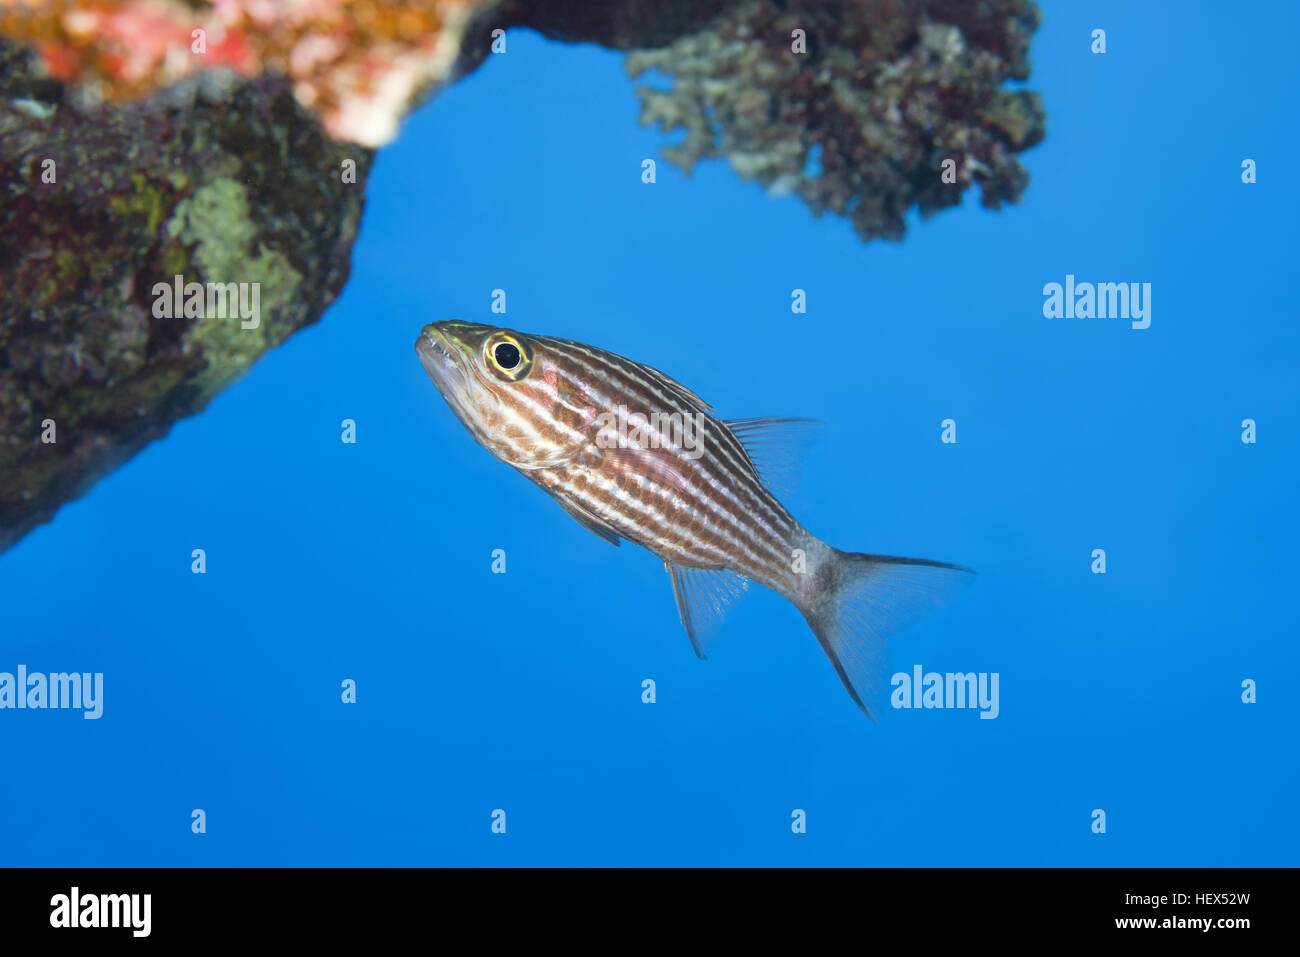 Largetoothed Cardinalfish, Pacific tiger cardinalfish or Big-toothed cardinal (Cheilodipterus macrodon) swims near coral reef on background, Red sea,  Stock Photo